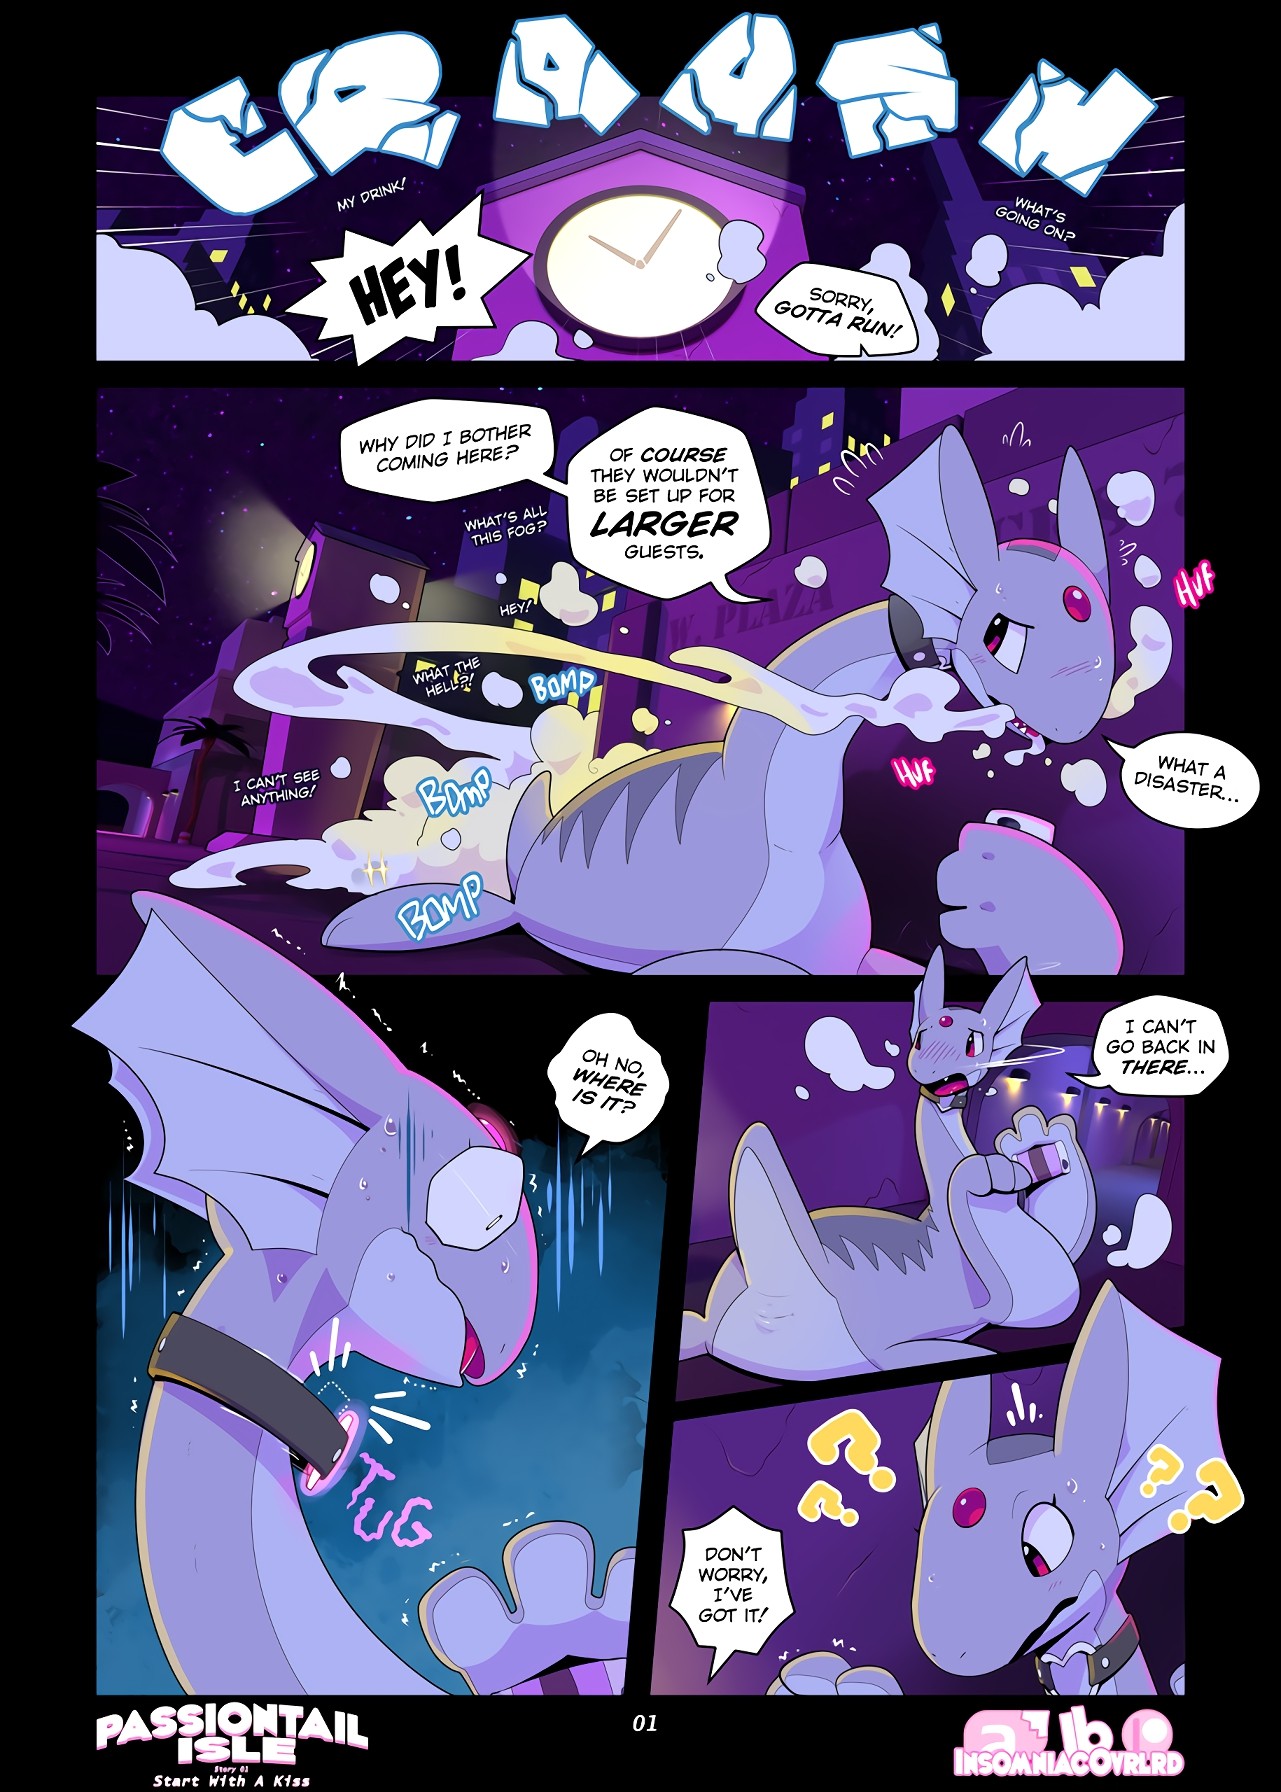 Passiontail Isle by Insomniacovrlrd porn comic picture 2